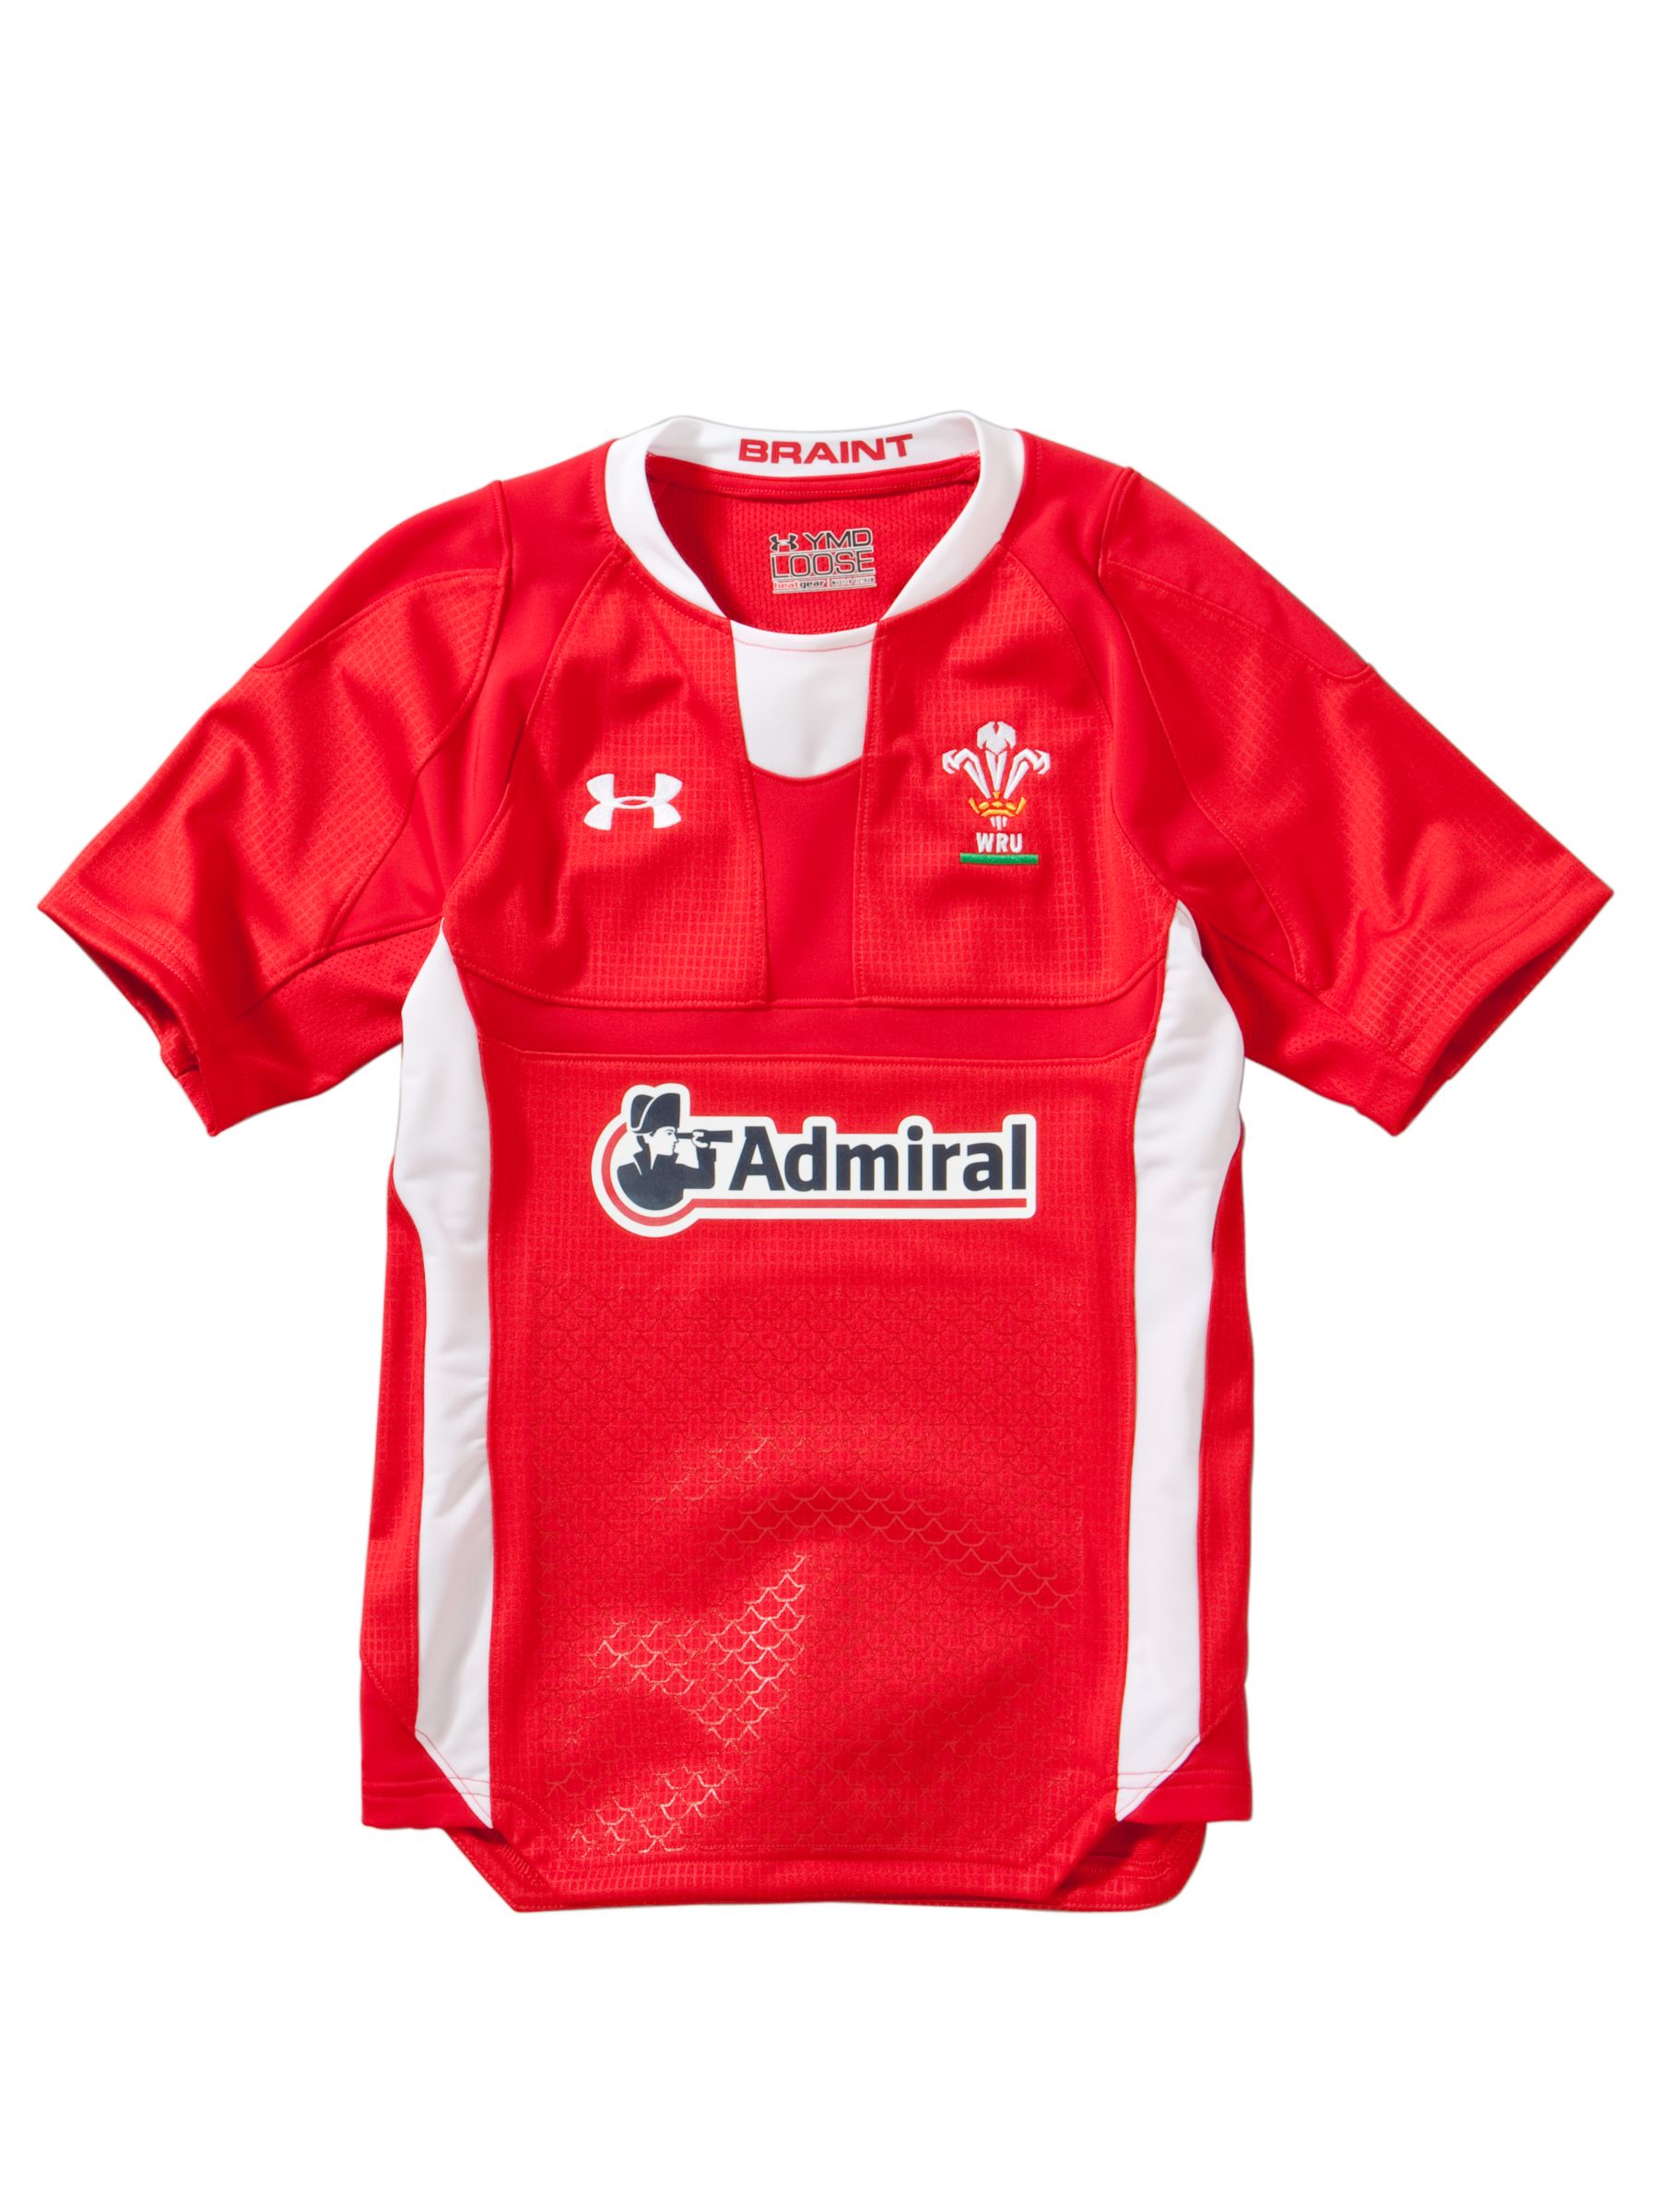 Under Armour Youth WRU Home Rugby Shirt, Red